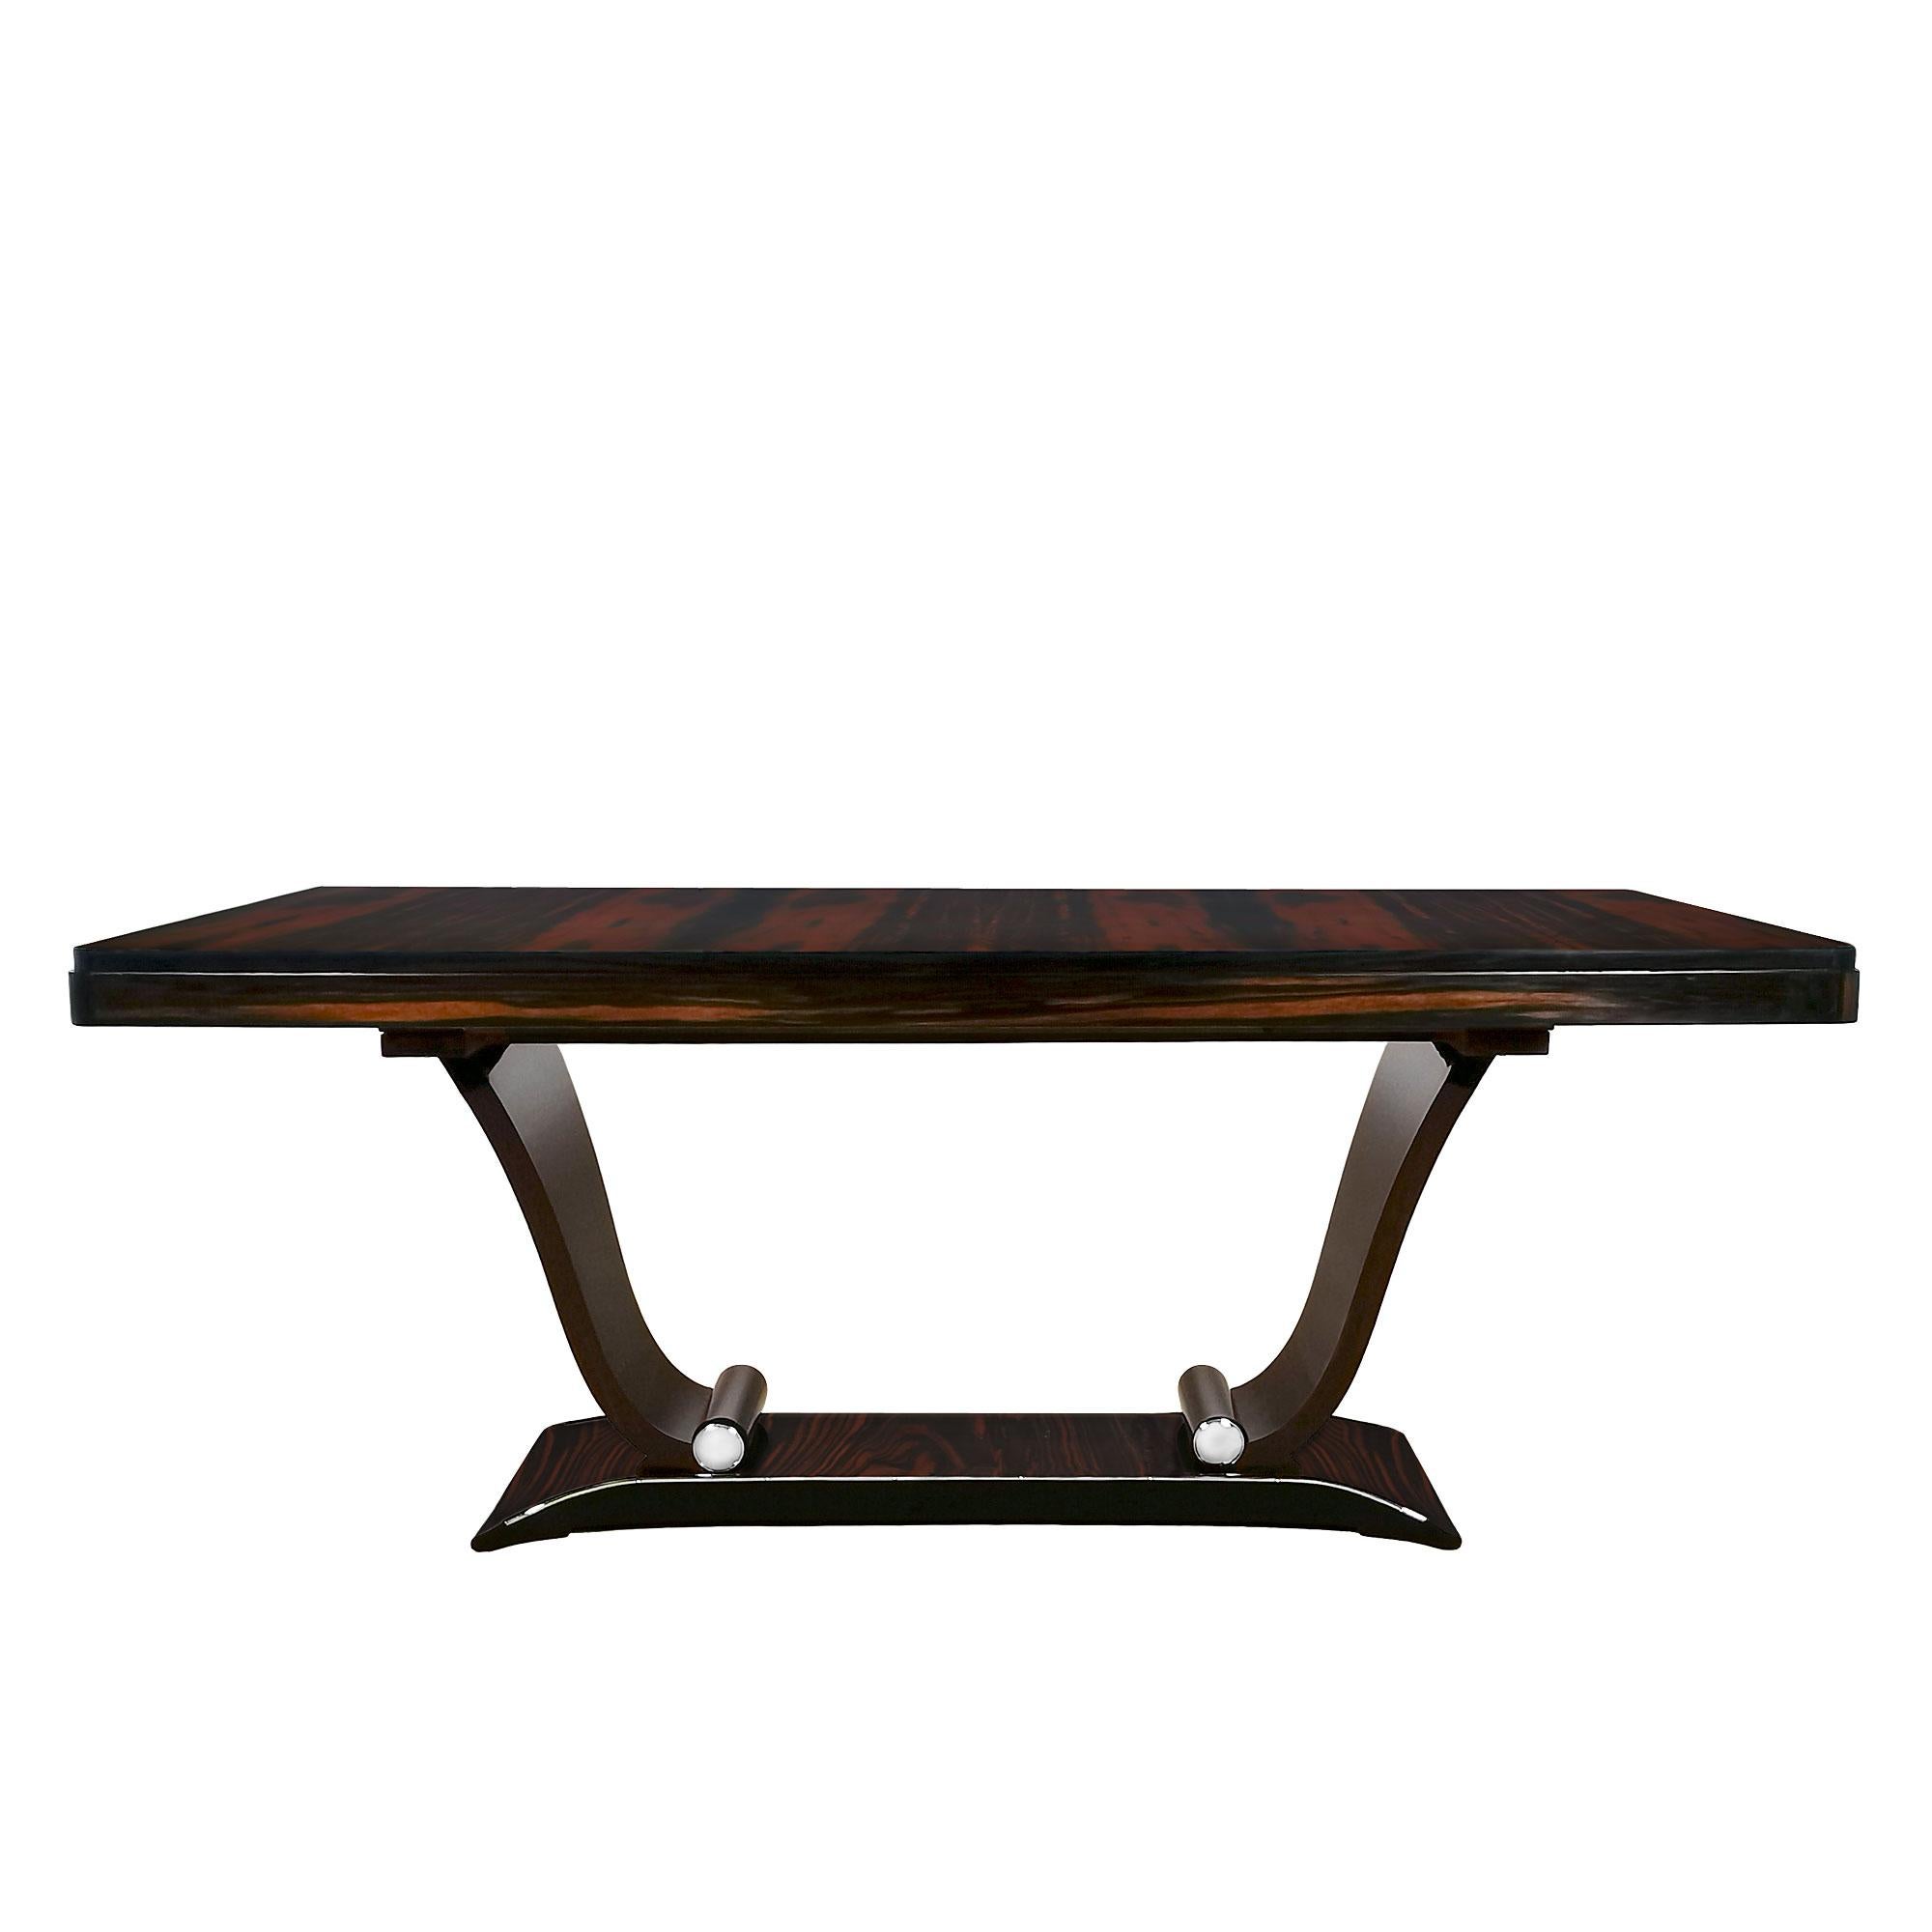 Art Deco dining table, solid wood with Macassar ebony veneer, dark brown lacquered base, extension leaf system, working as drawers with two originals leaves with Macassar ebony veneer, french polish. Nickel plated brass decoration on base.
Brand: